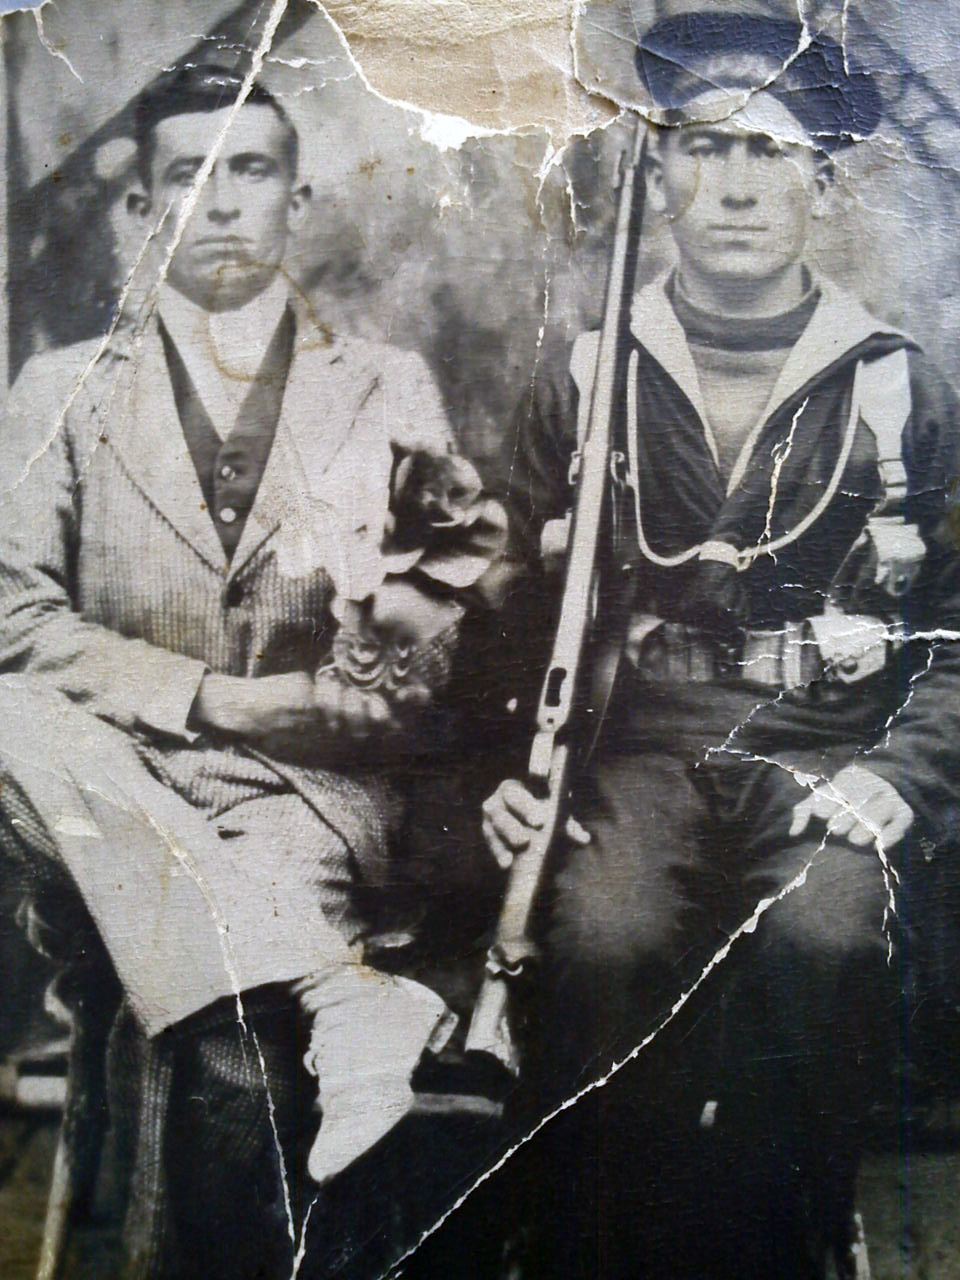 My grandfather shah Weiss (right) and khodakaram (left), Khorramshahr City, circa 1938. My grandfather was a soldier in Abadan and Khorramshahr was in the Imperial Navy. This photo shows him at the age of 20. 